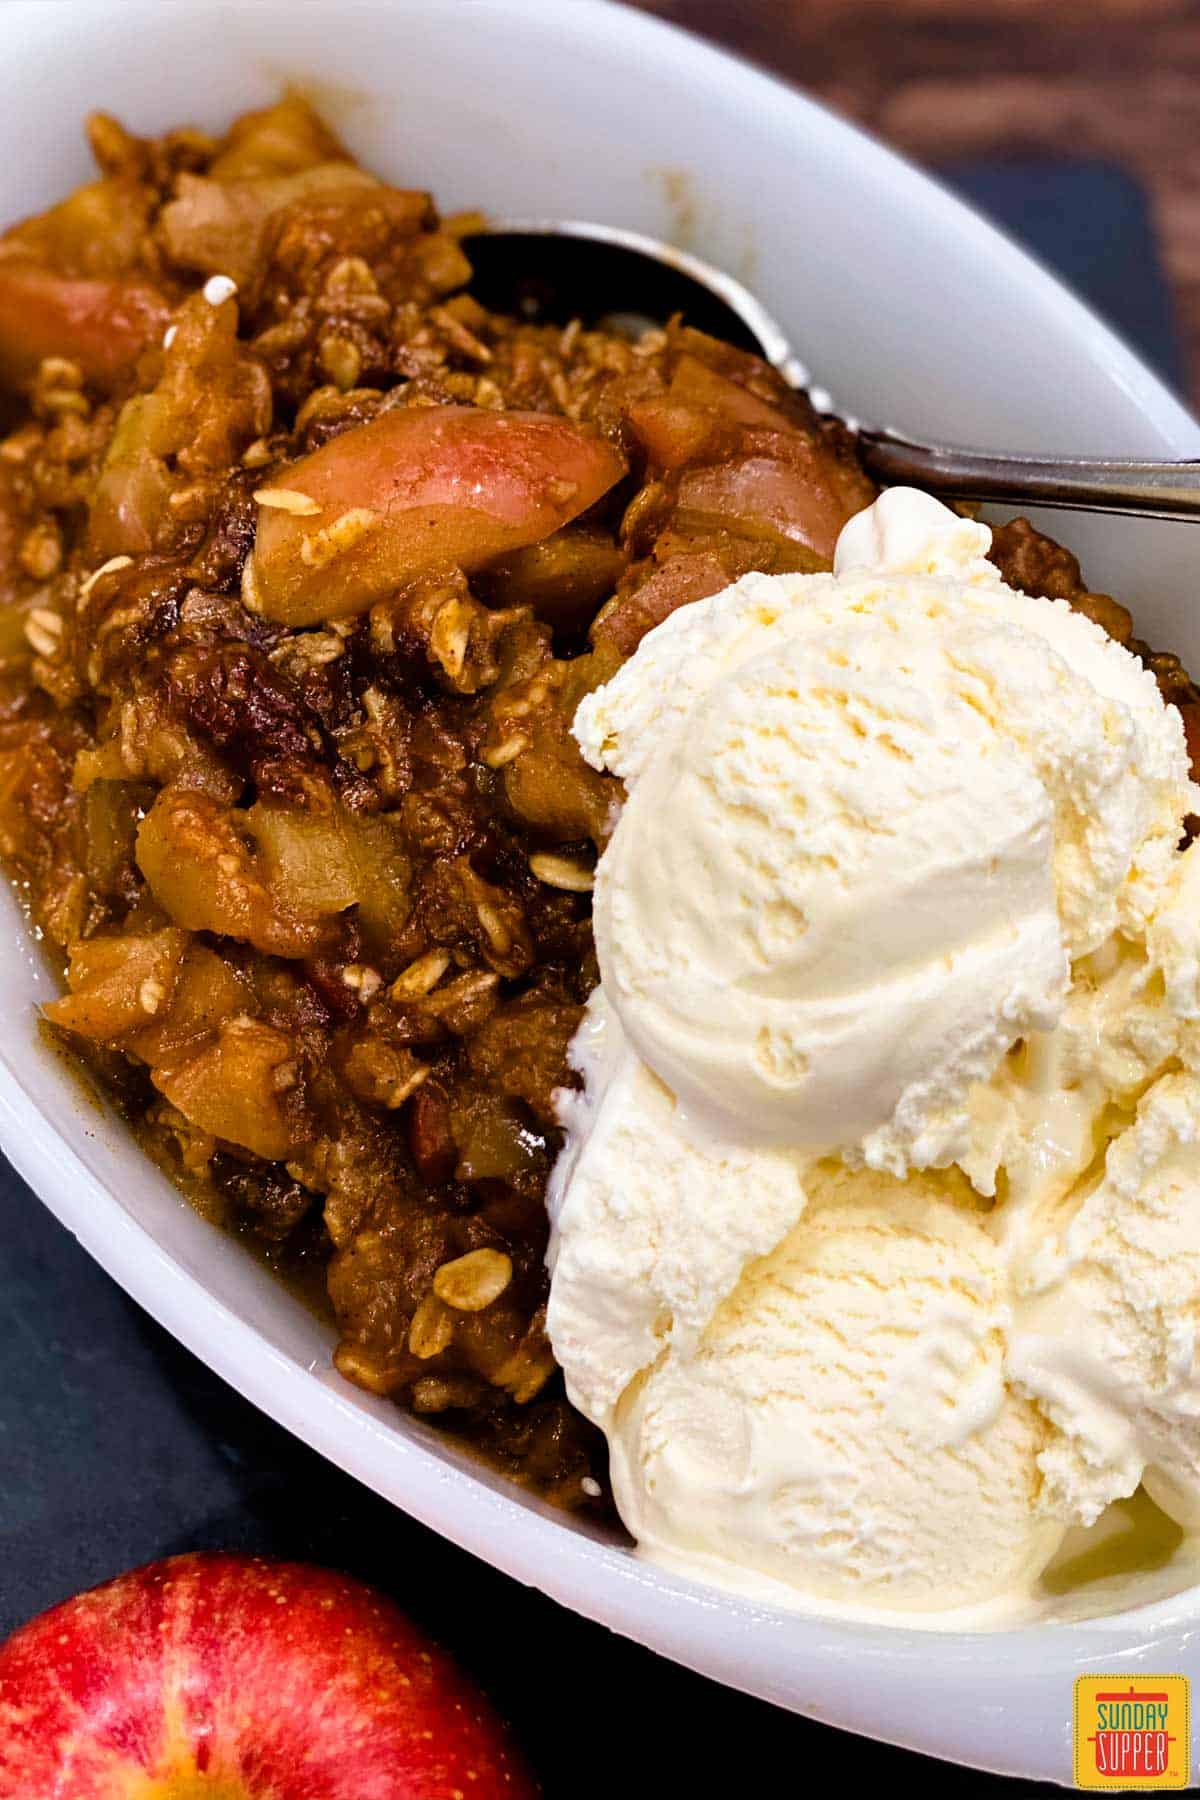 Instant pot apple crisp in a white dish with ice cream